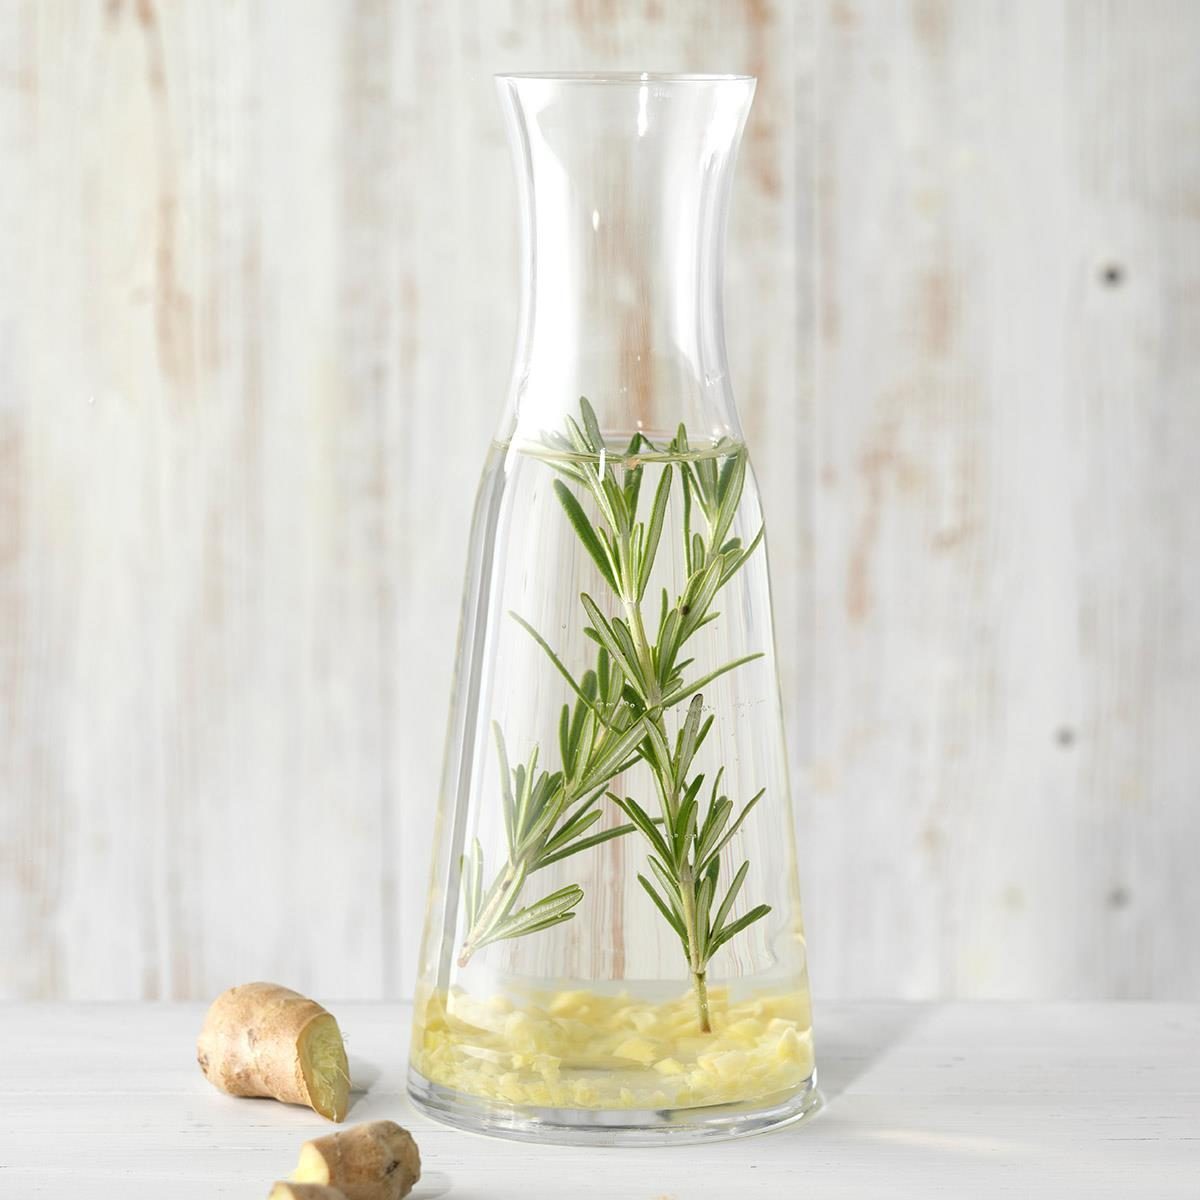 Rosemary and Ginger Infused Water